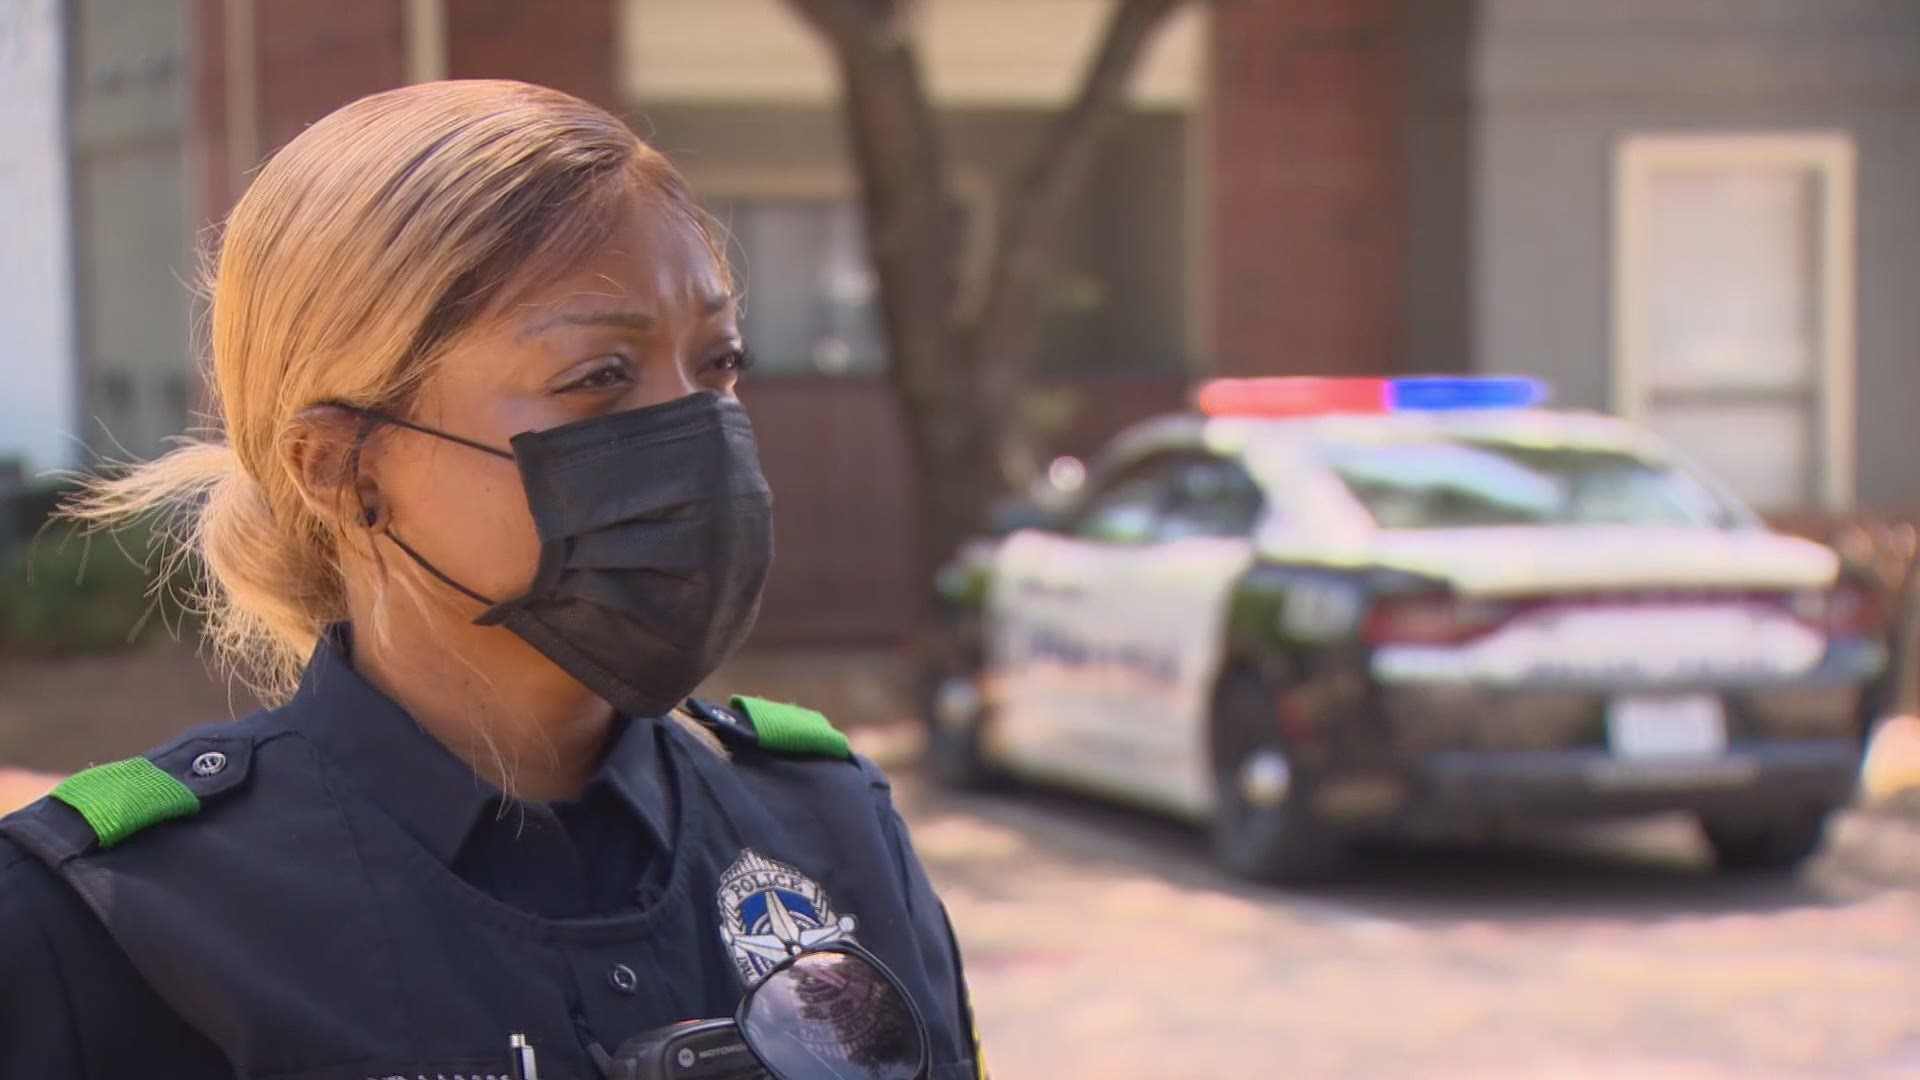 Dallas police officers like Tiffany Williams and Lance Delasbour say during challenging times, they focus on empathy and trust when connecting with neighbors.